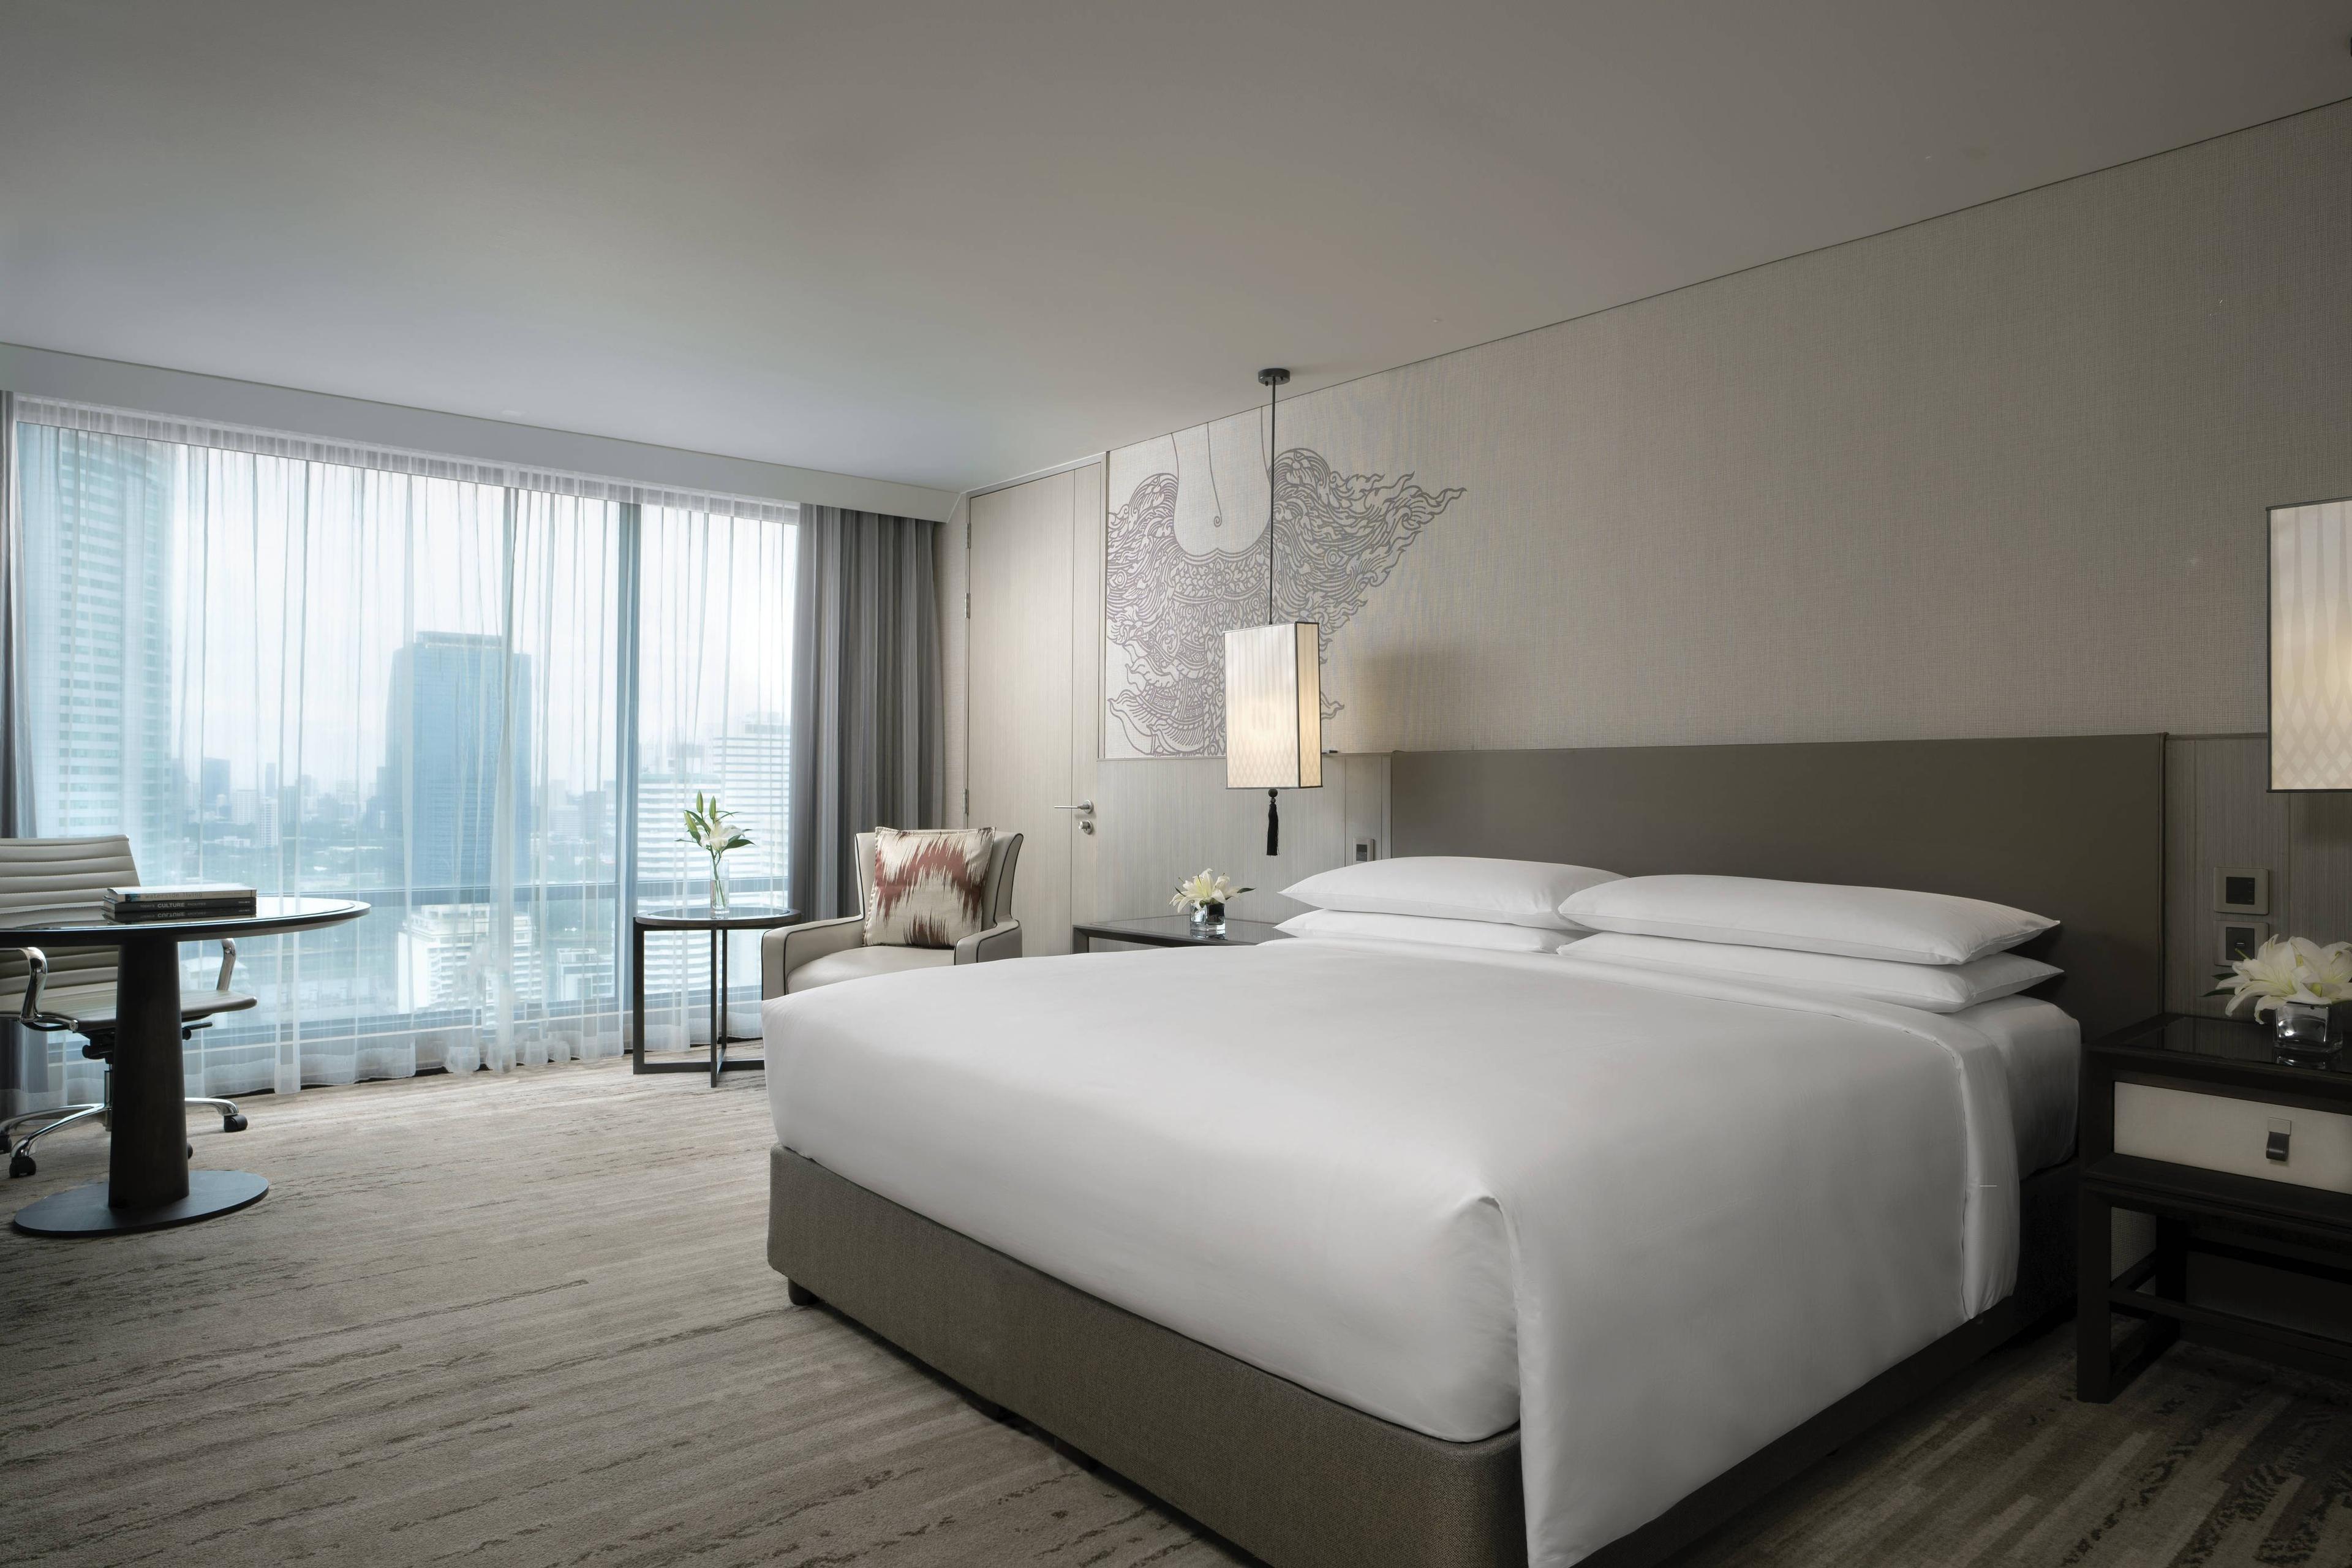 Our Premium Club rooms are stylish, spacious and fully equipped with sumptuous king beds. Guests will also be treated to panoramic views of the Bangkok skyline through floor-to-ceiling windows.